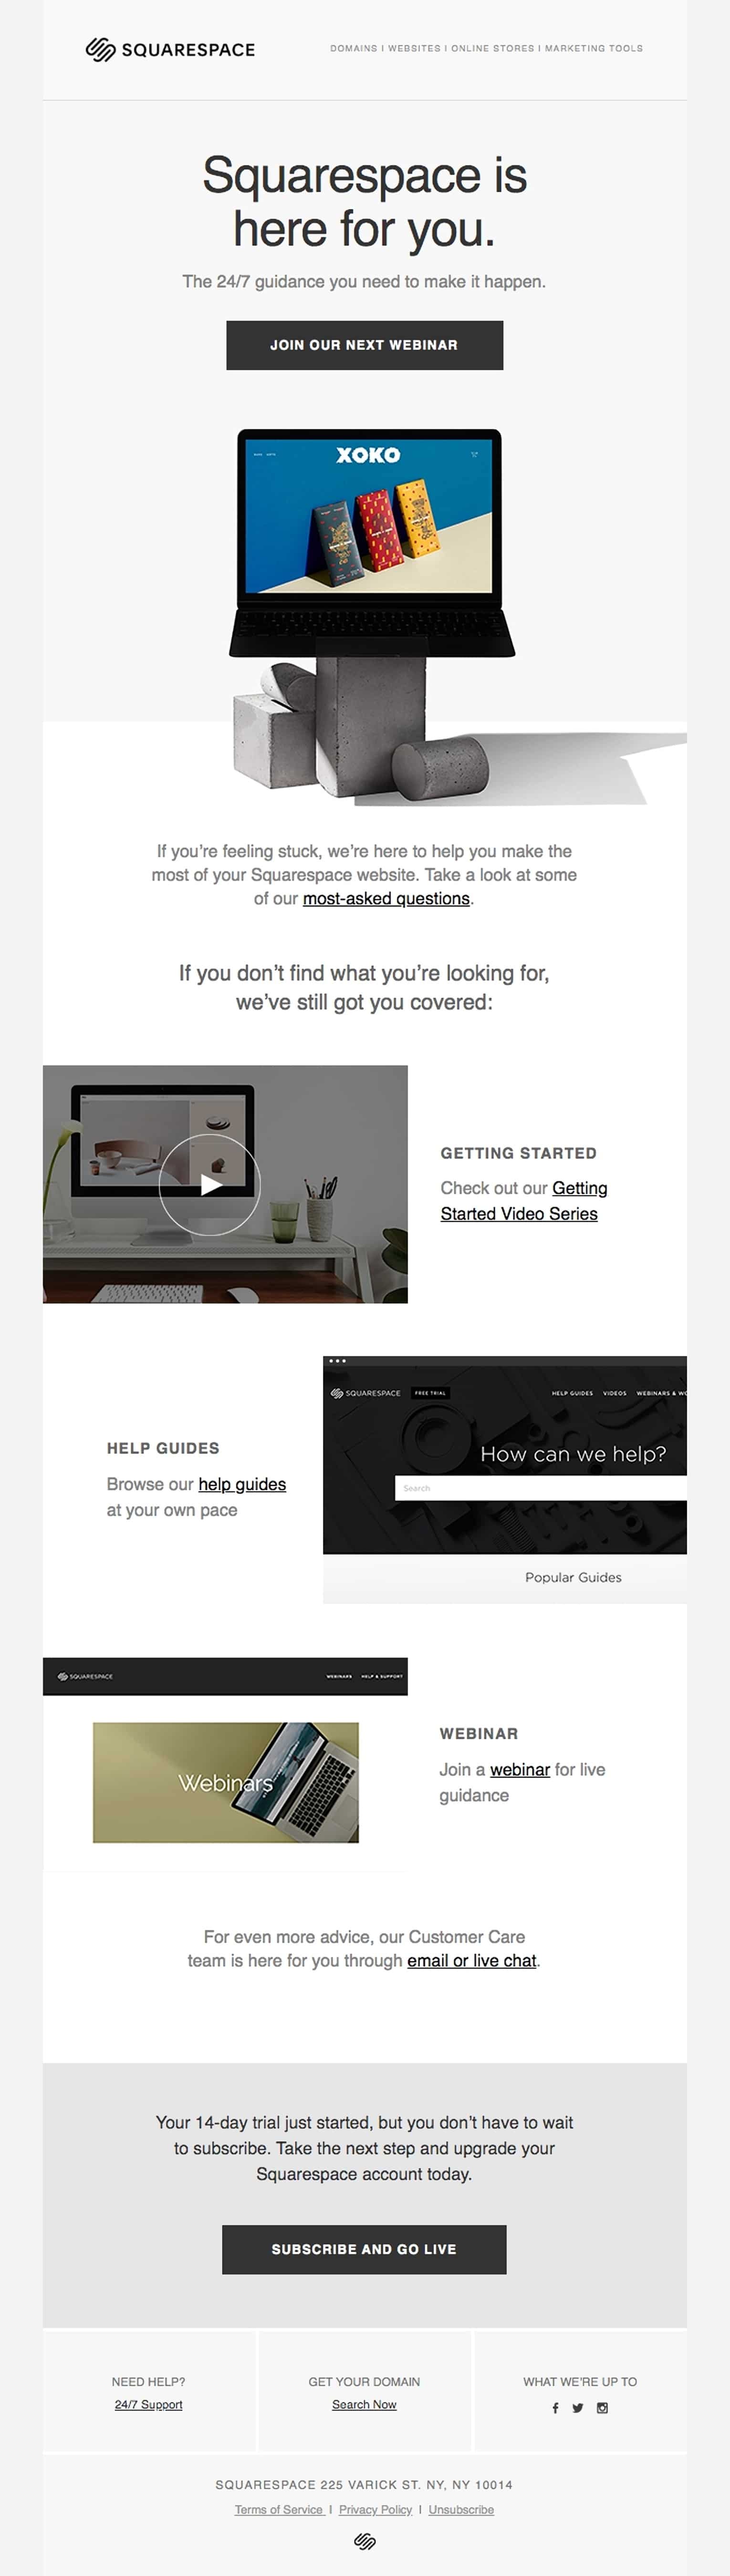 Squarespace webinar introduction email